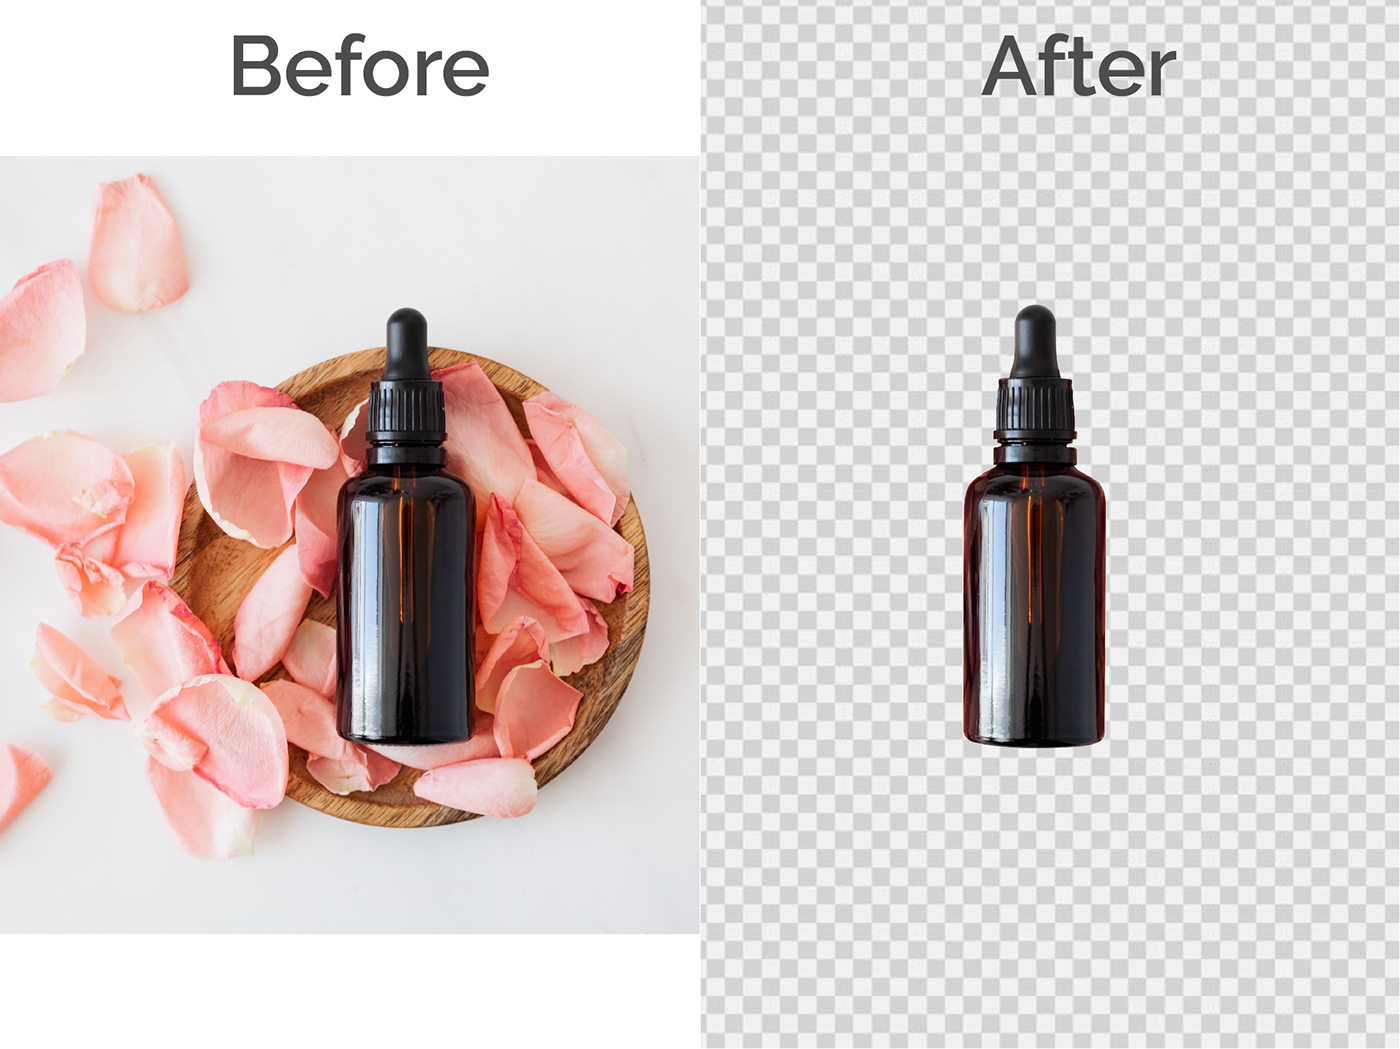 Background remove and clipping path